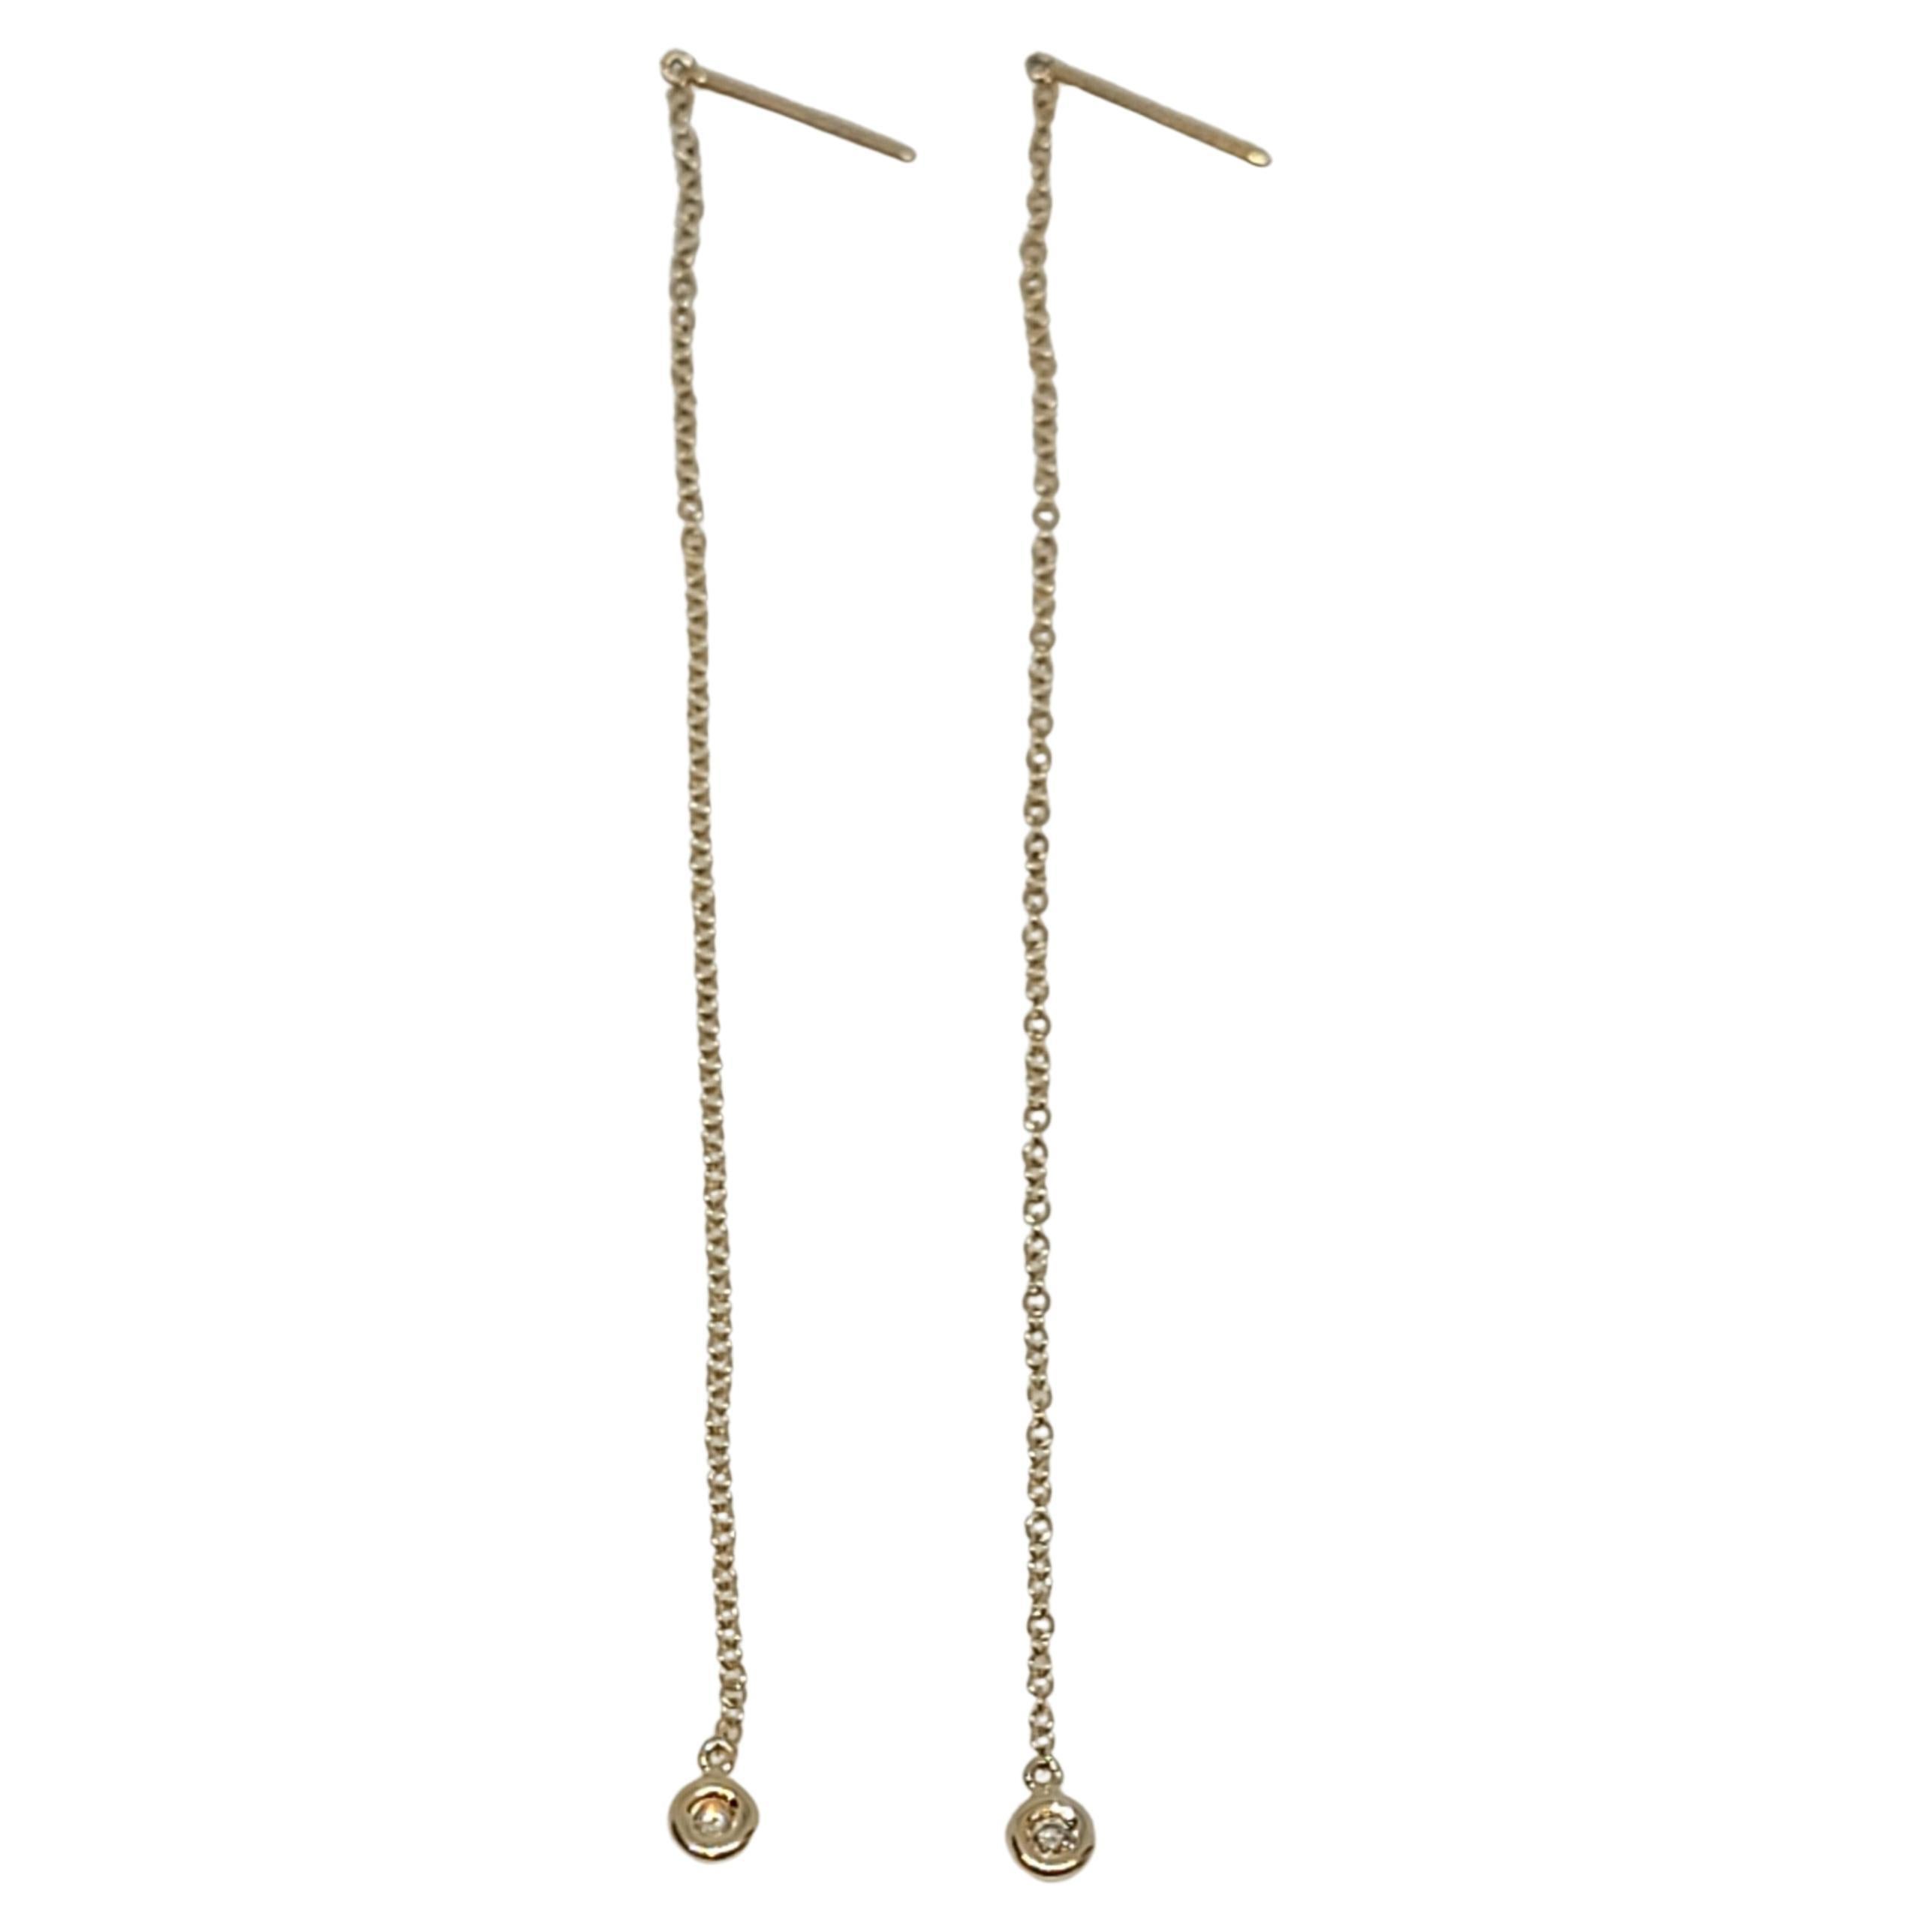 14kt Gold Thread Chain Earrings with Two Bezel Set Diamonds of Approx. .04cttw